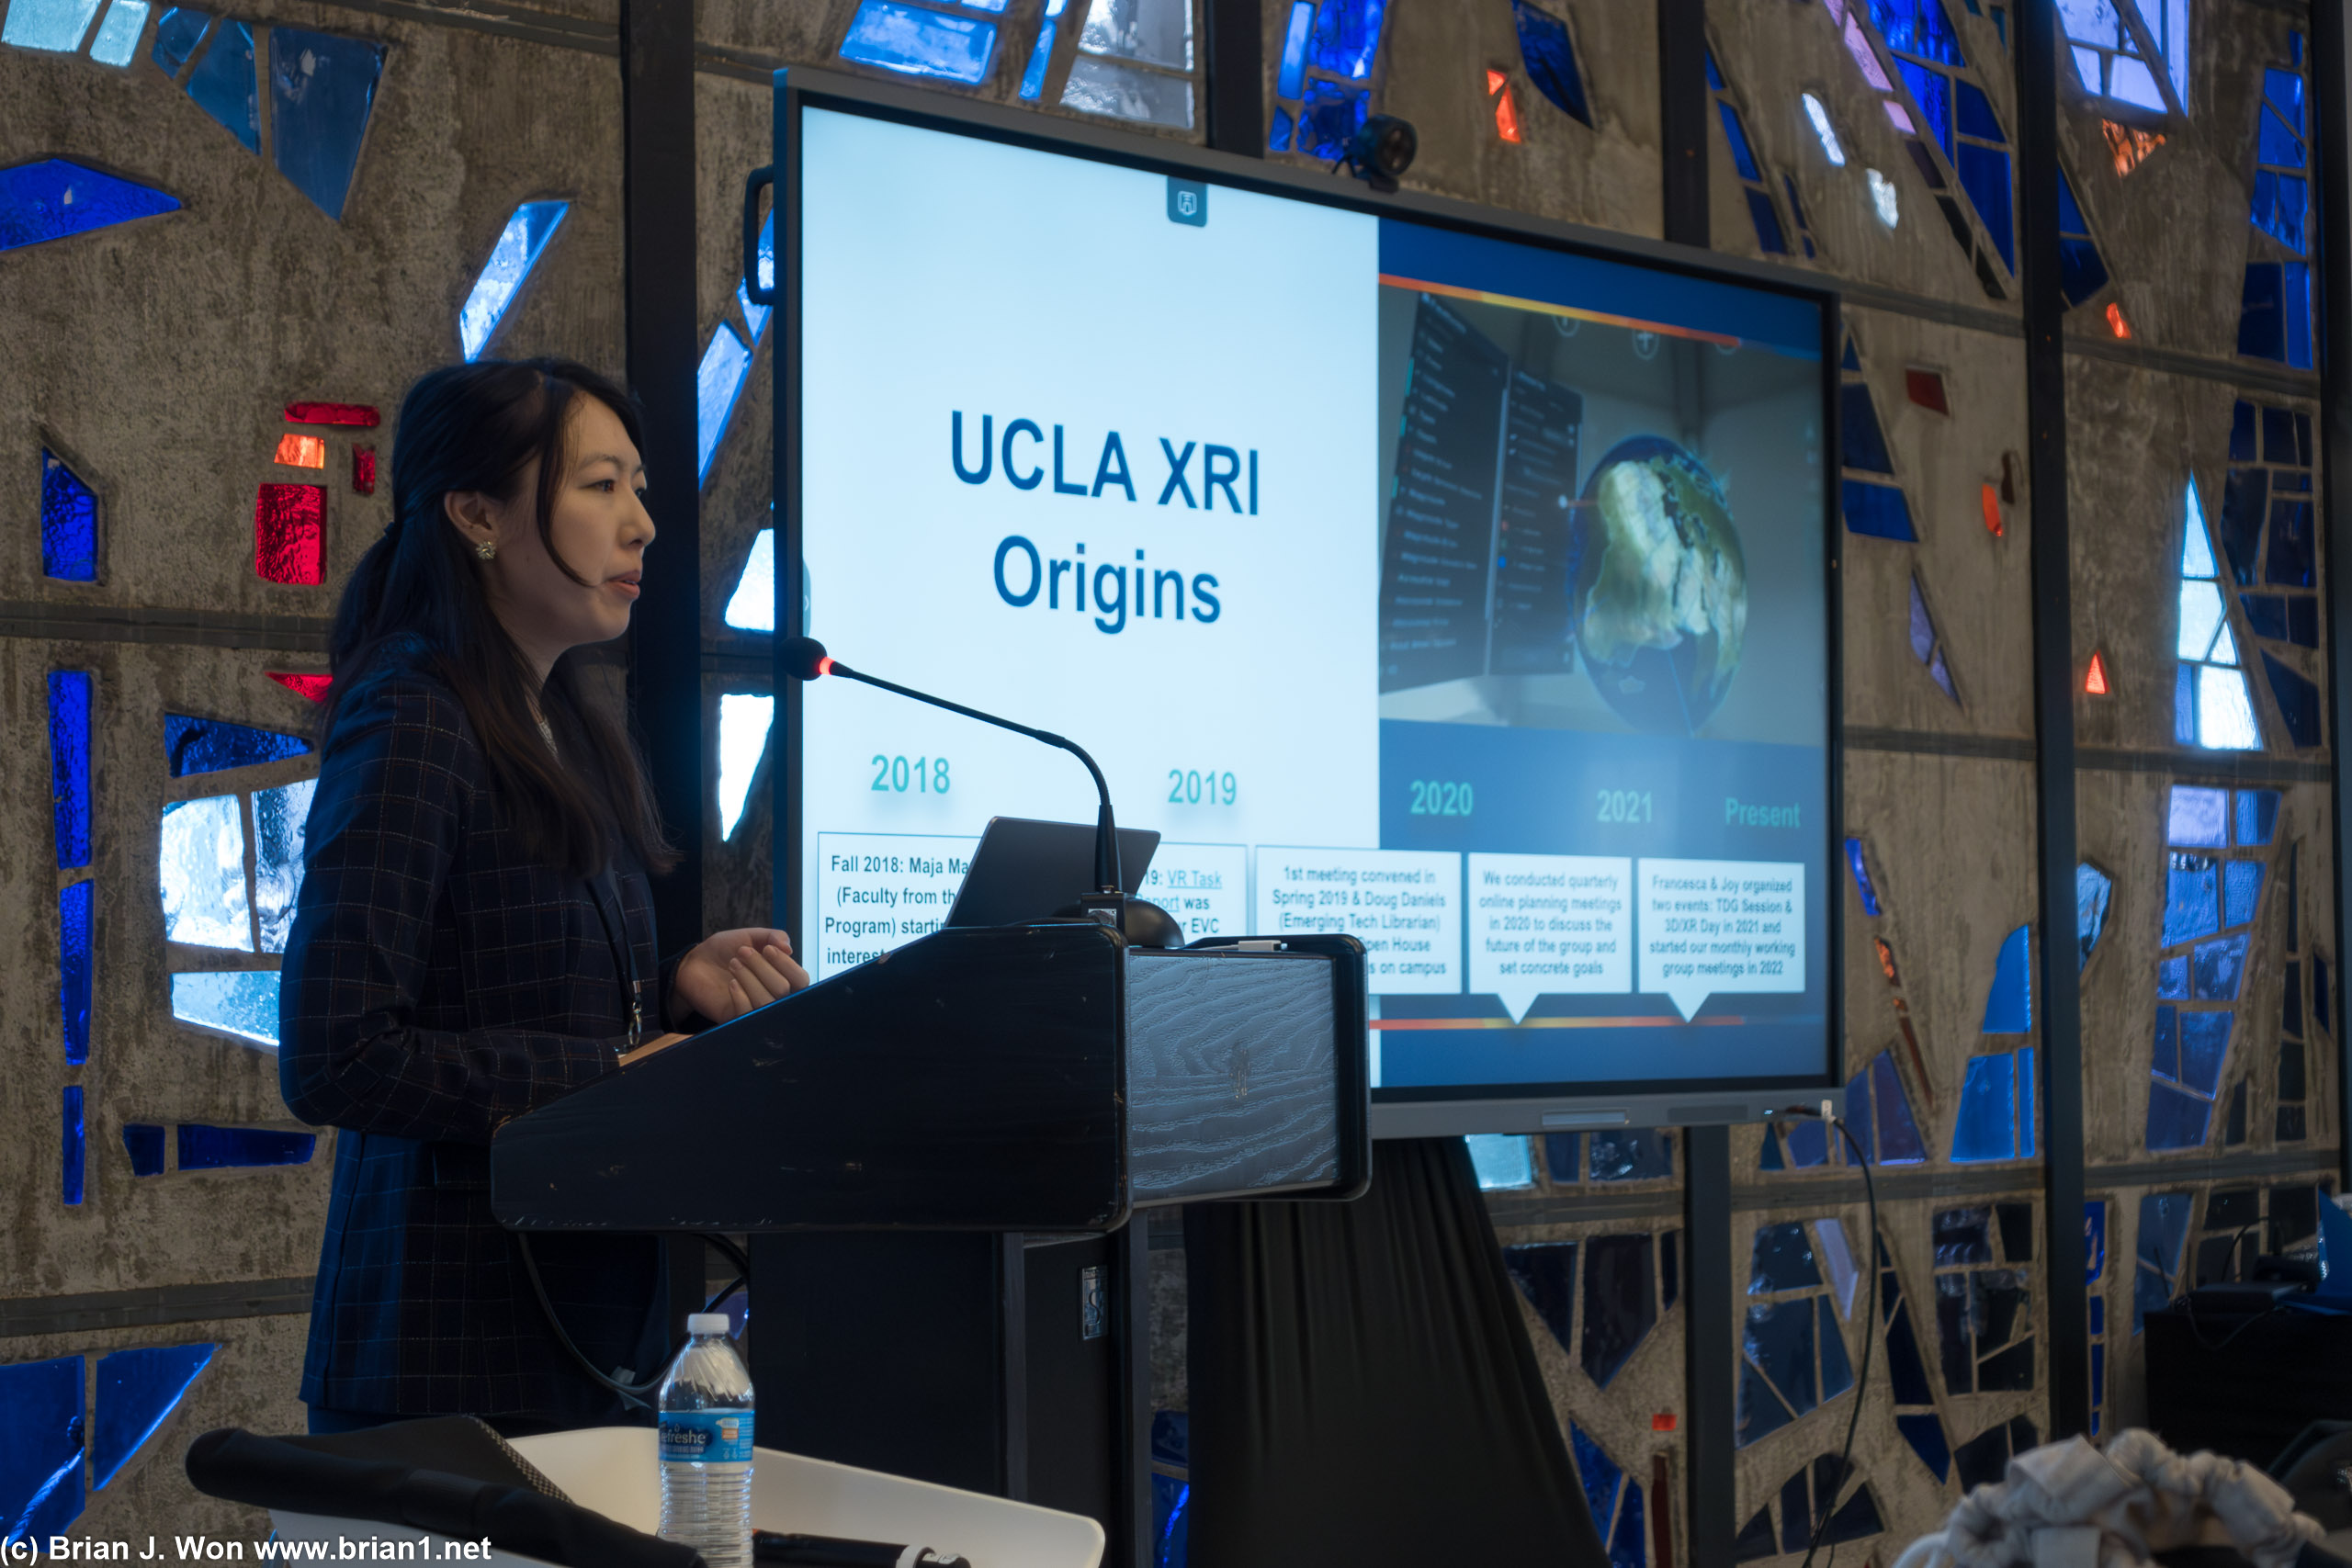 Fostering Cross-campus Collaboration around XR at UCLA.